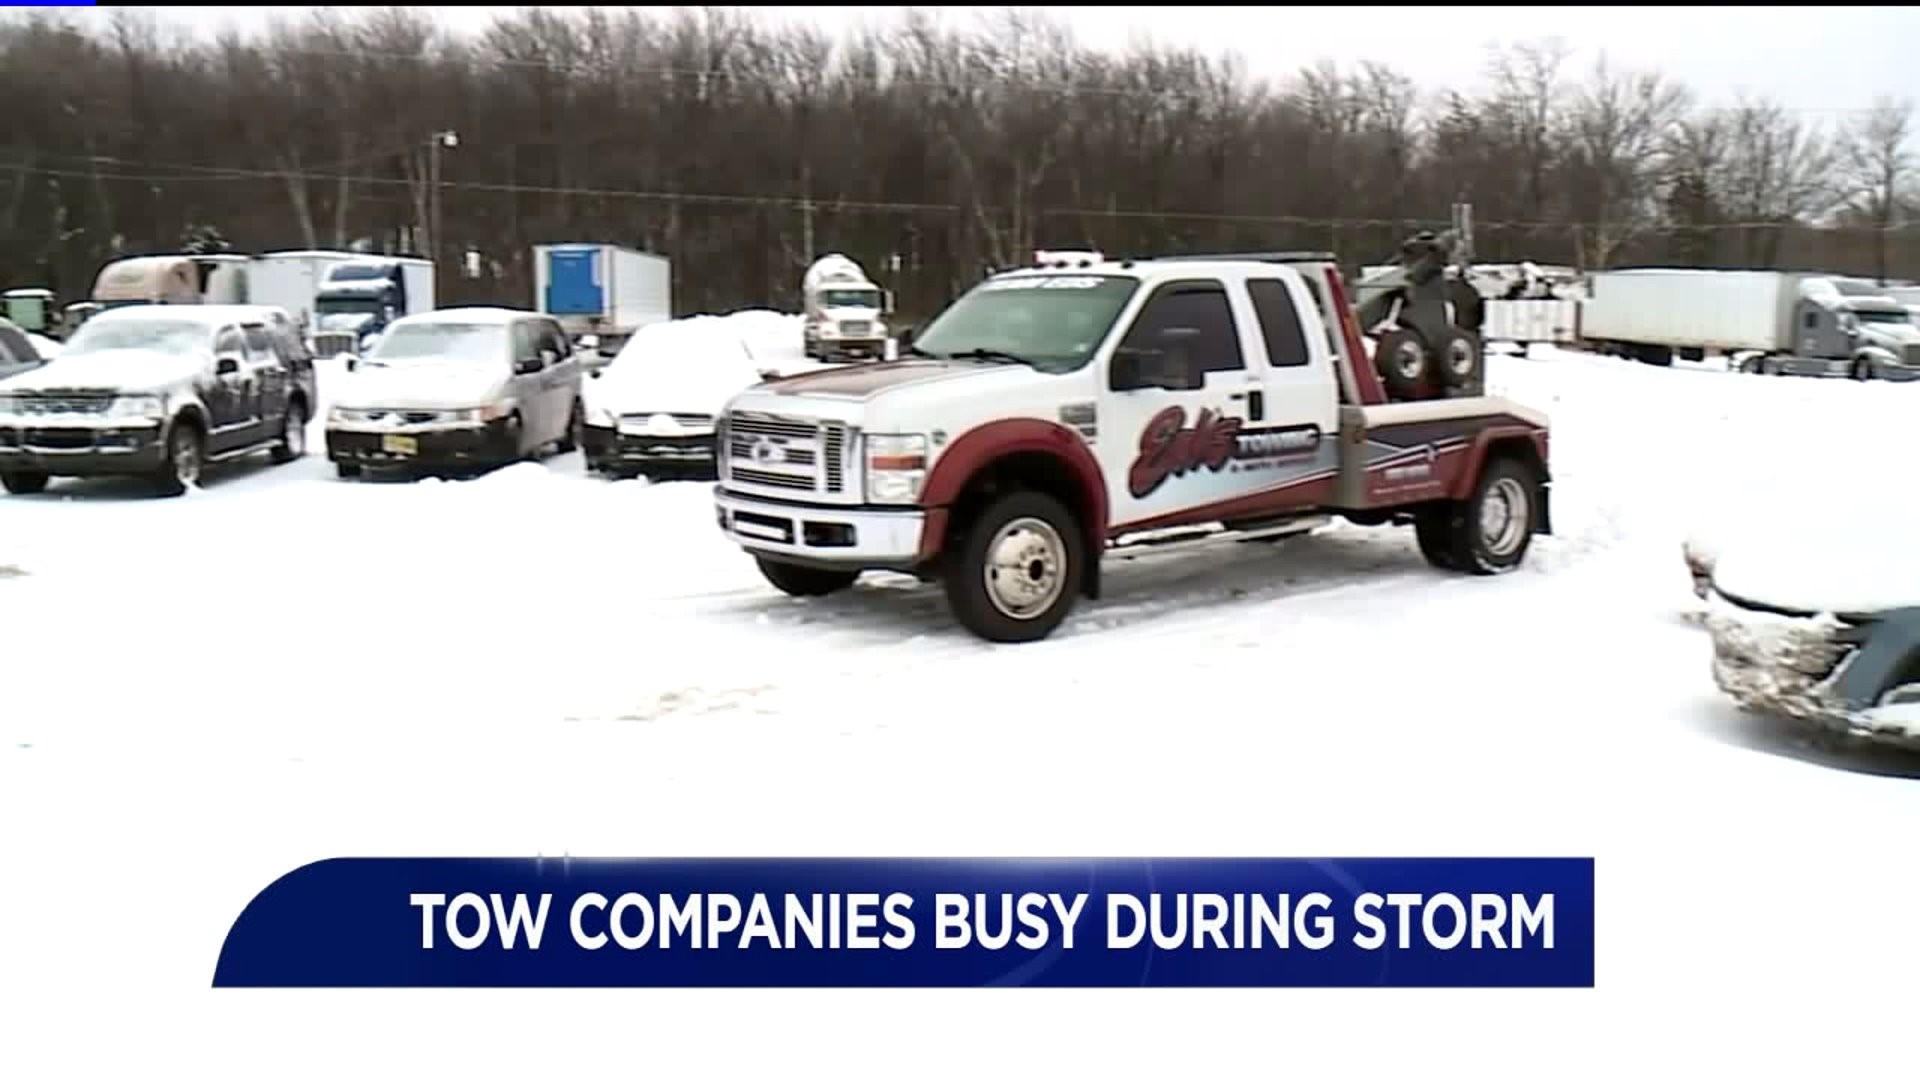 Tow Companies Busy Pulling Out Cars from Snow Storm in the Poconos